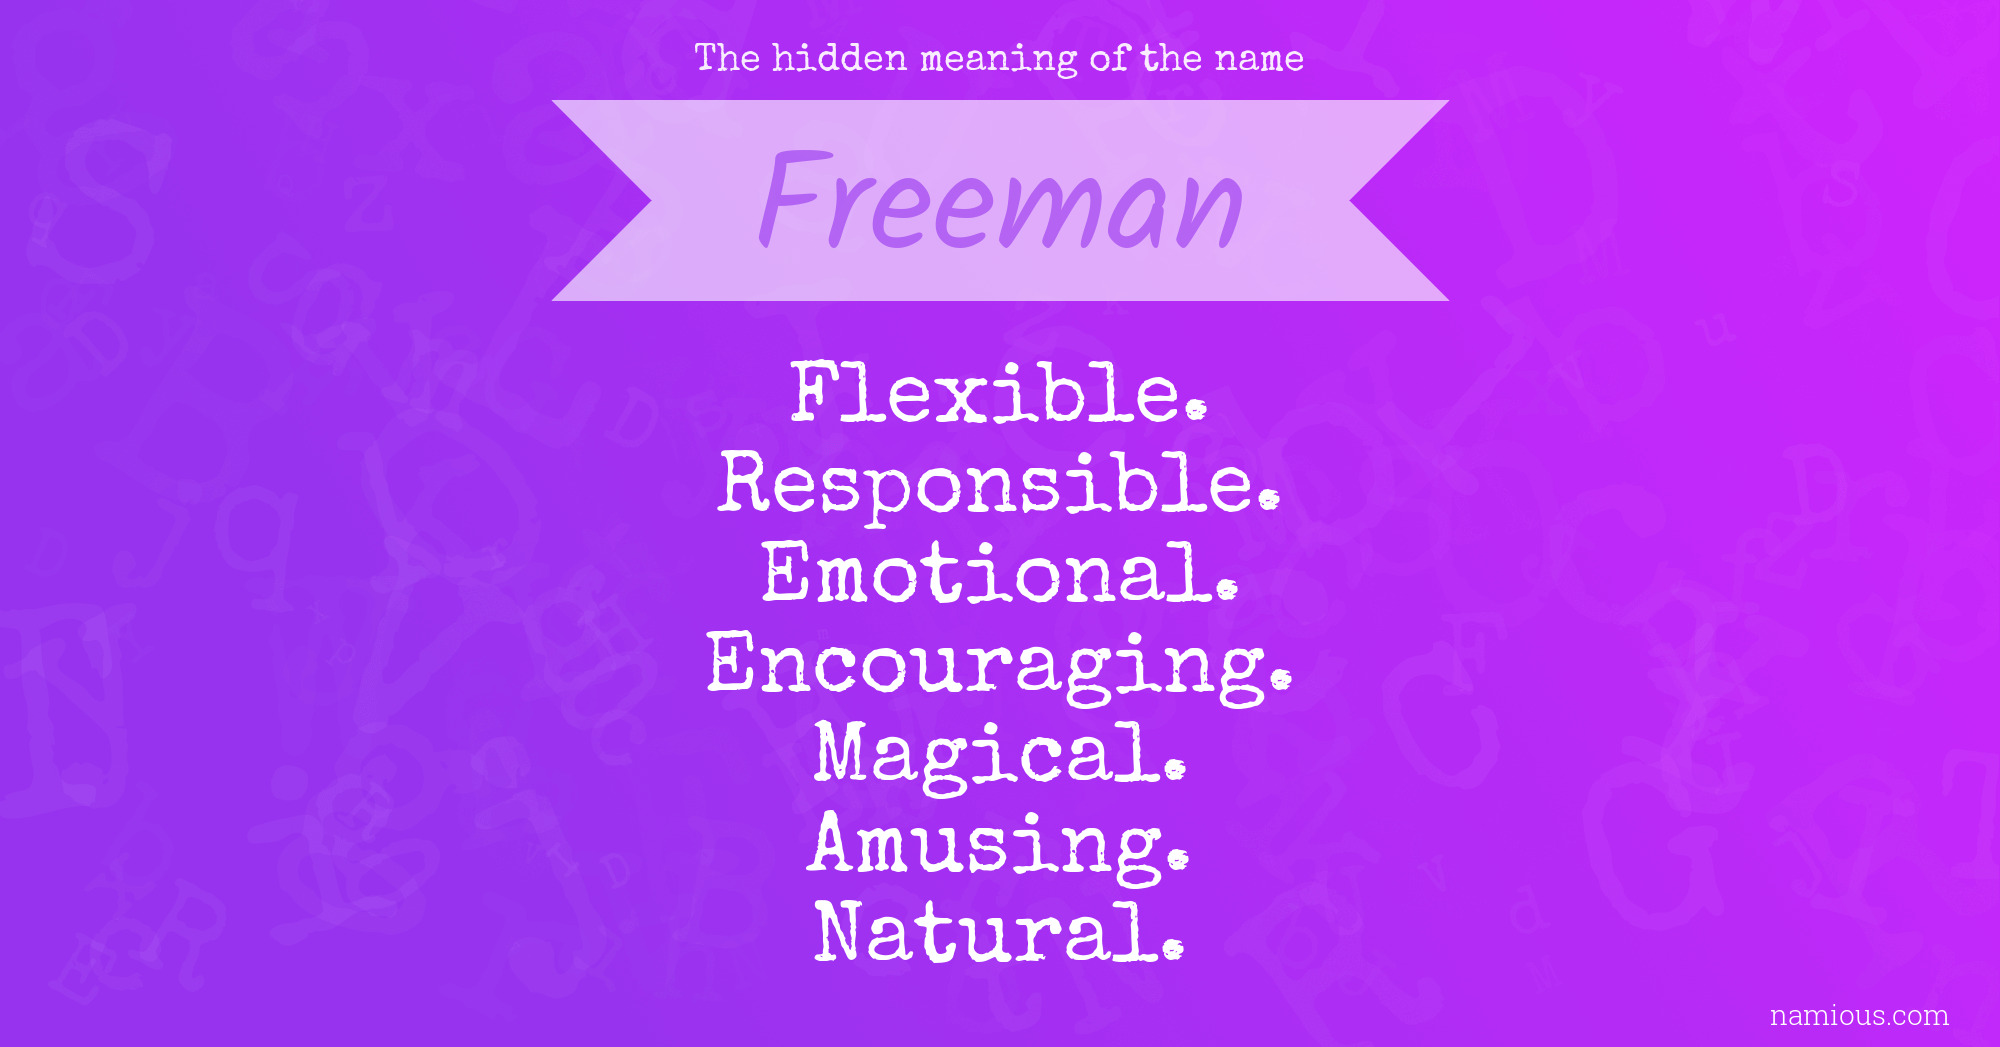 The hidden meaning of the name Freeman